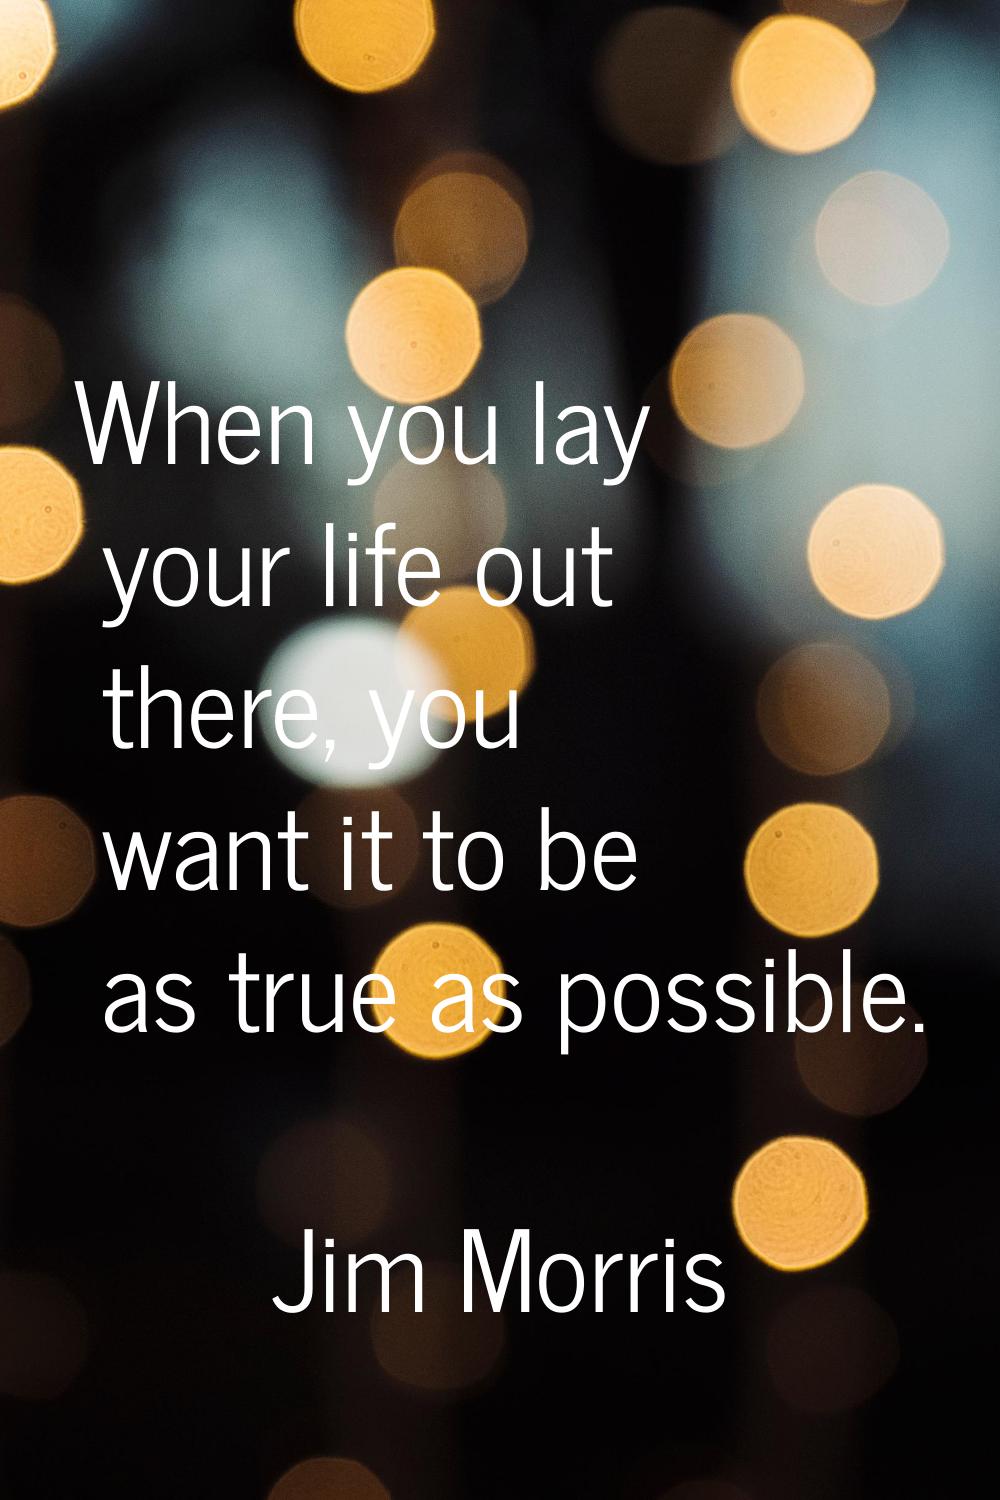 When you lay your life out there, you want it to be as true as possible.